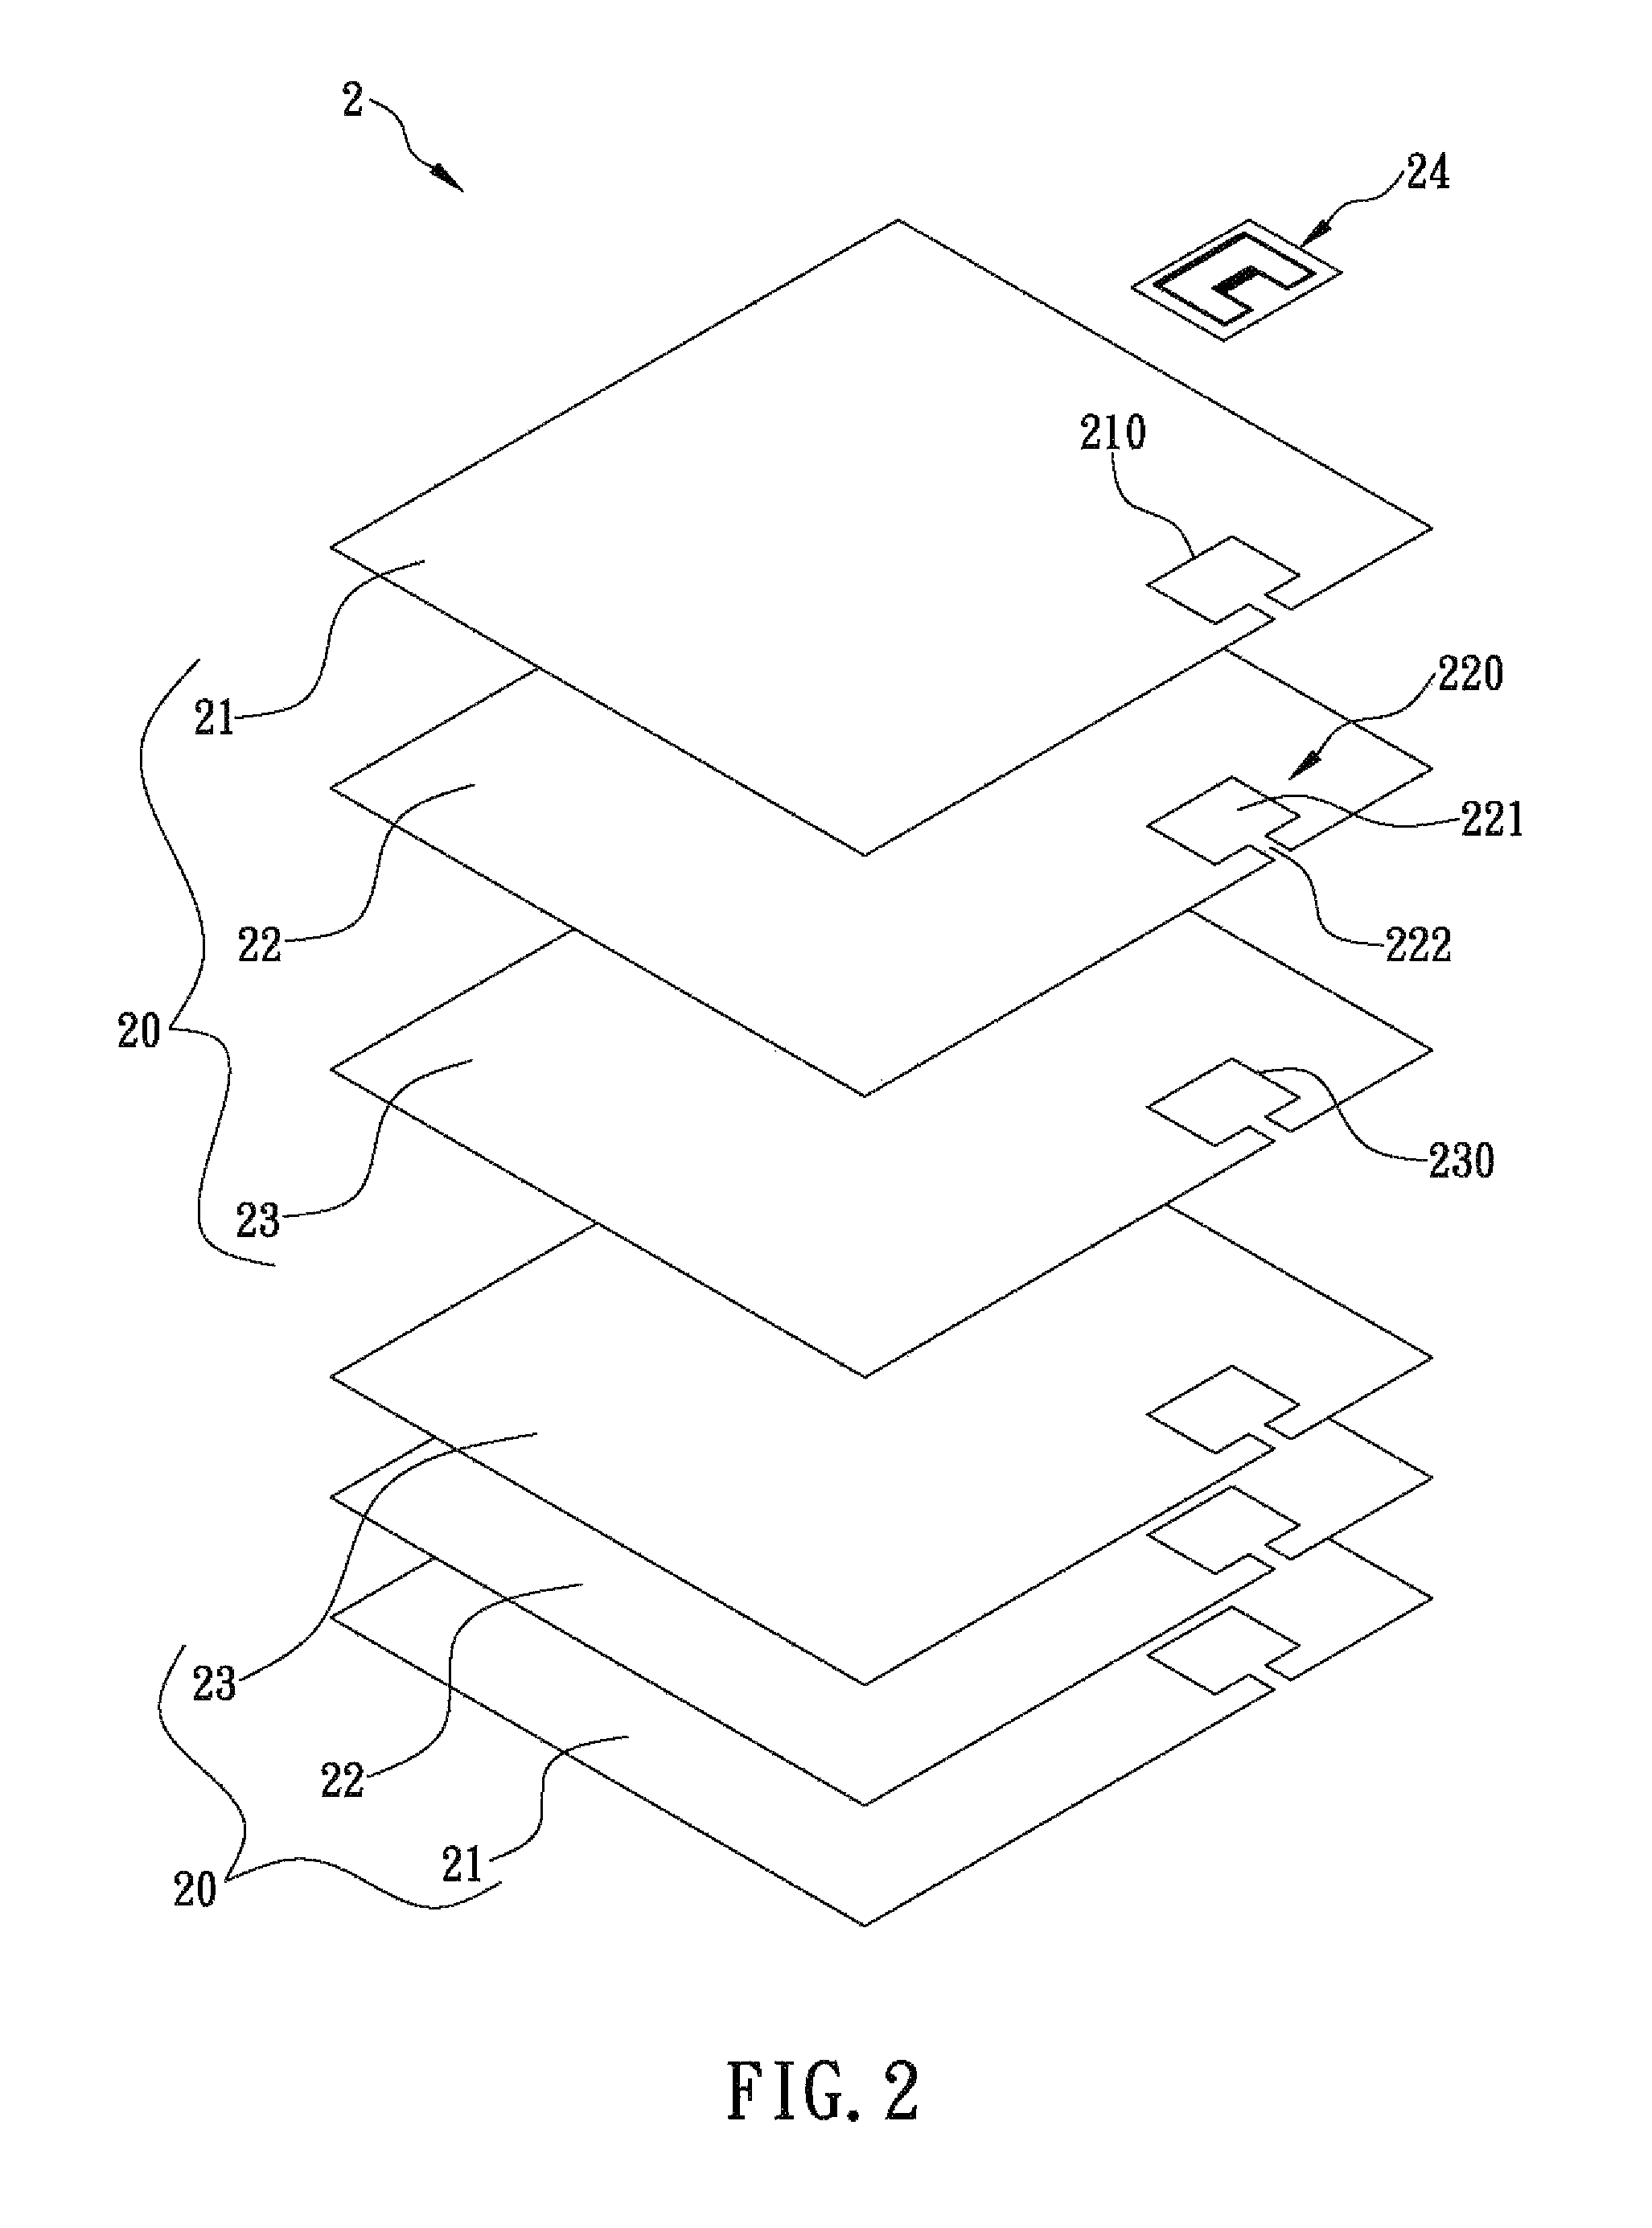 Package bag with externally attached communication device